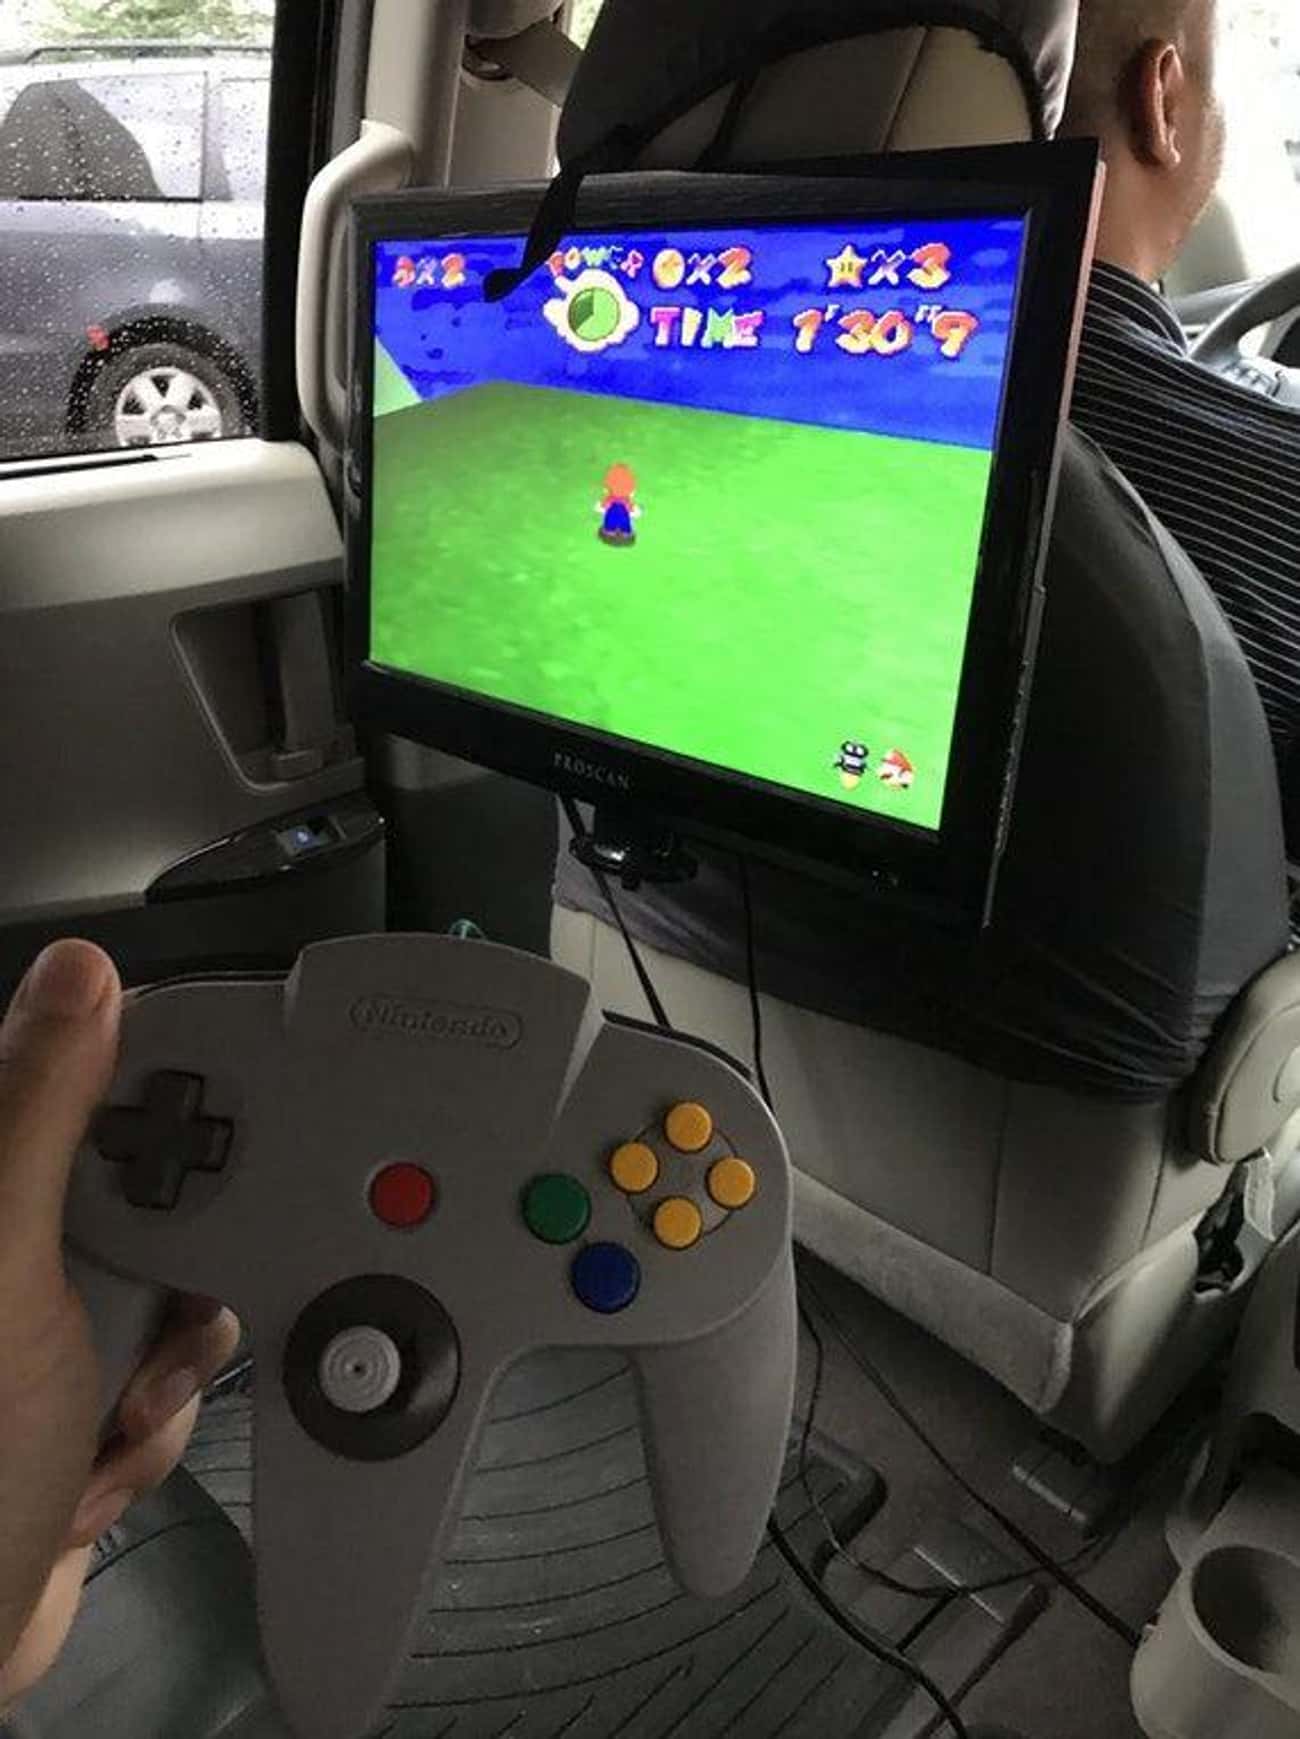 N64 Takes To the Road